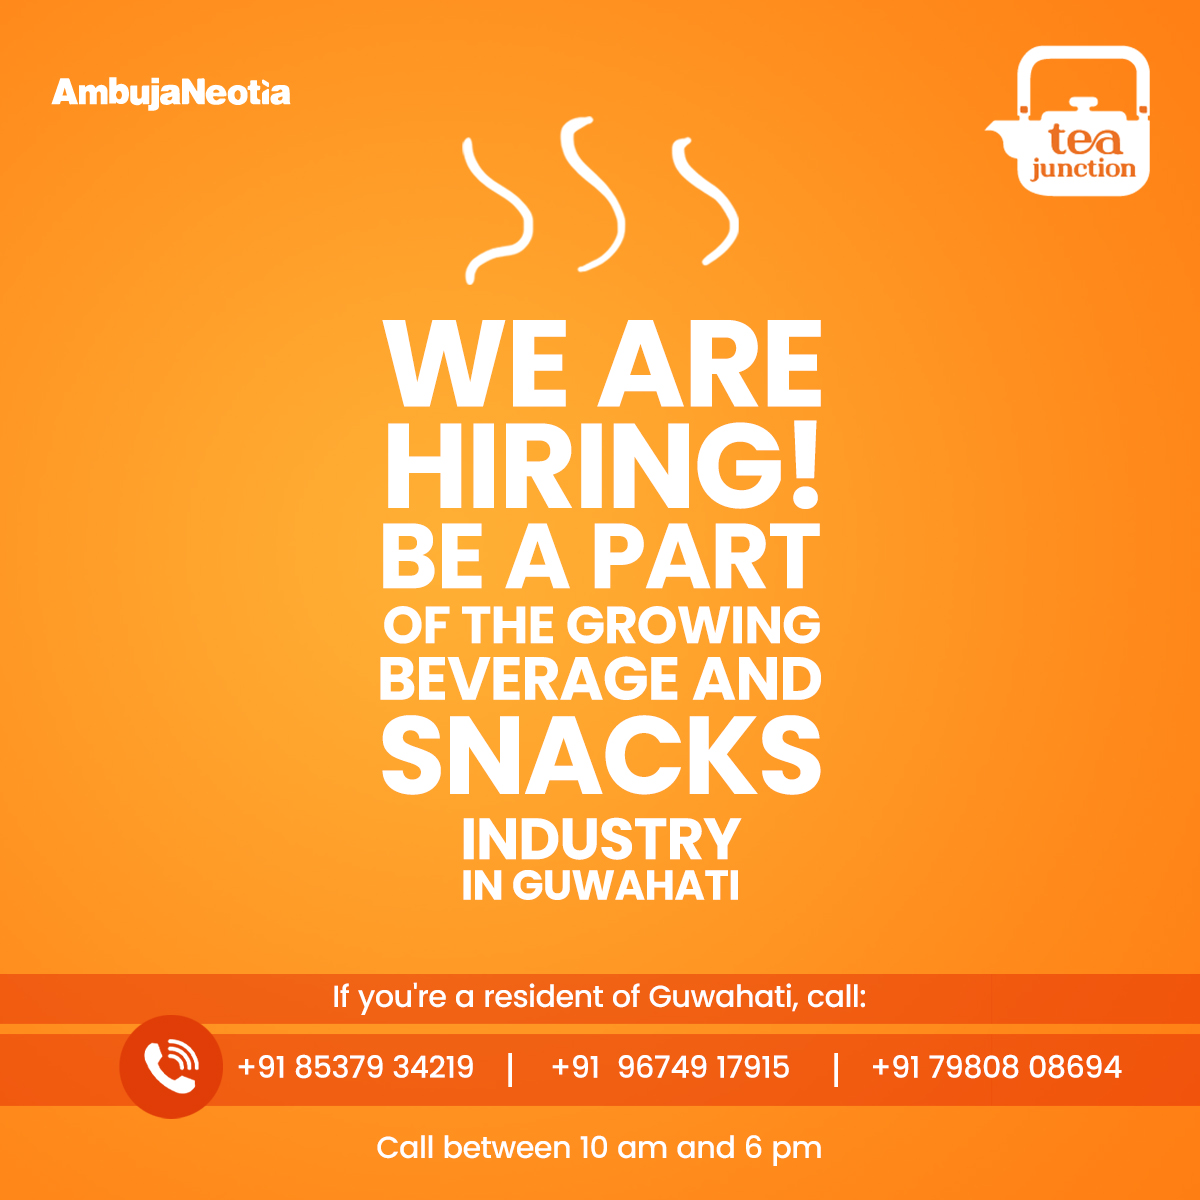 We are hiring team members in Guwahati. Come, be a part of a reputed brand and join the force of the booming beverage and snacks industry. Call us today!

#TeaJunction #AmbujaNeotia #hiring #joinourteam #newopportunities #brewingjoy #newoutlet #guwahati #deliciousnessawaits